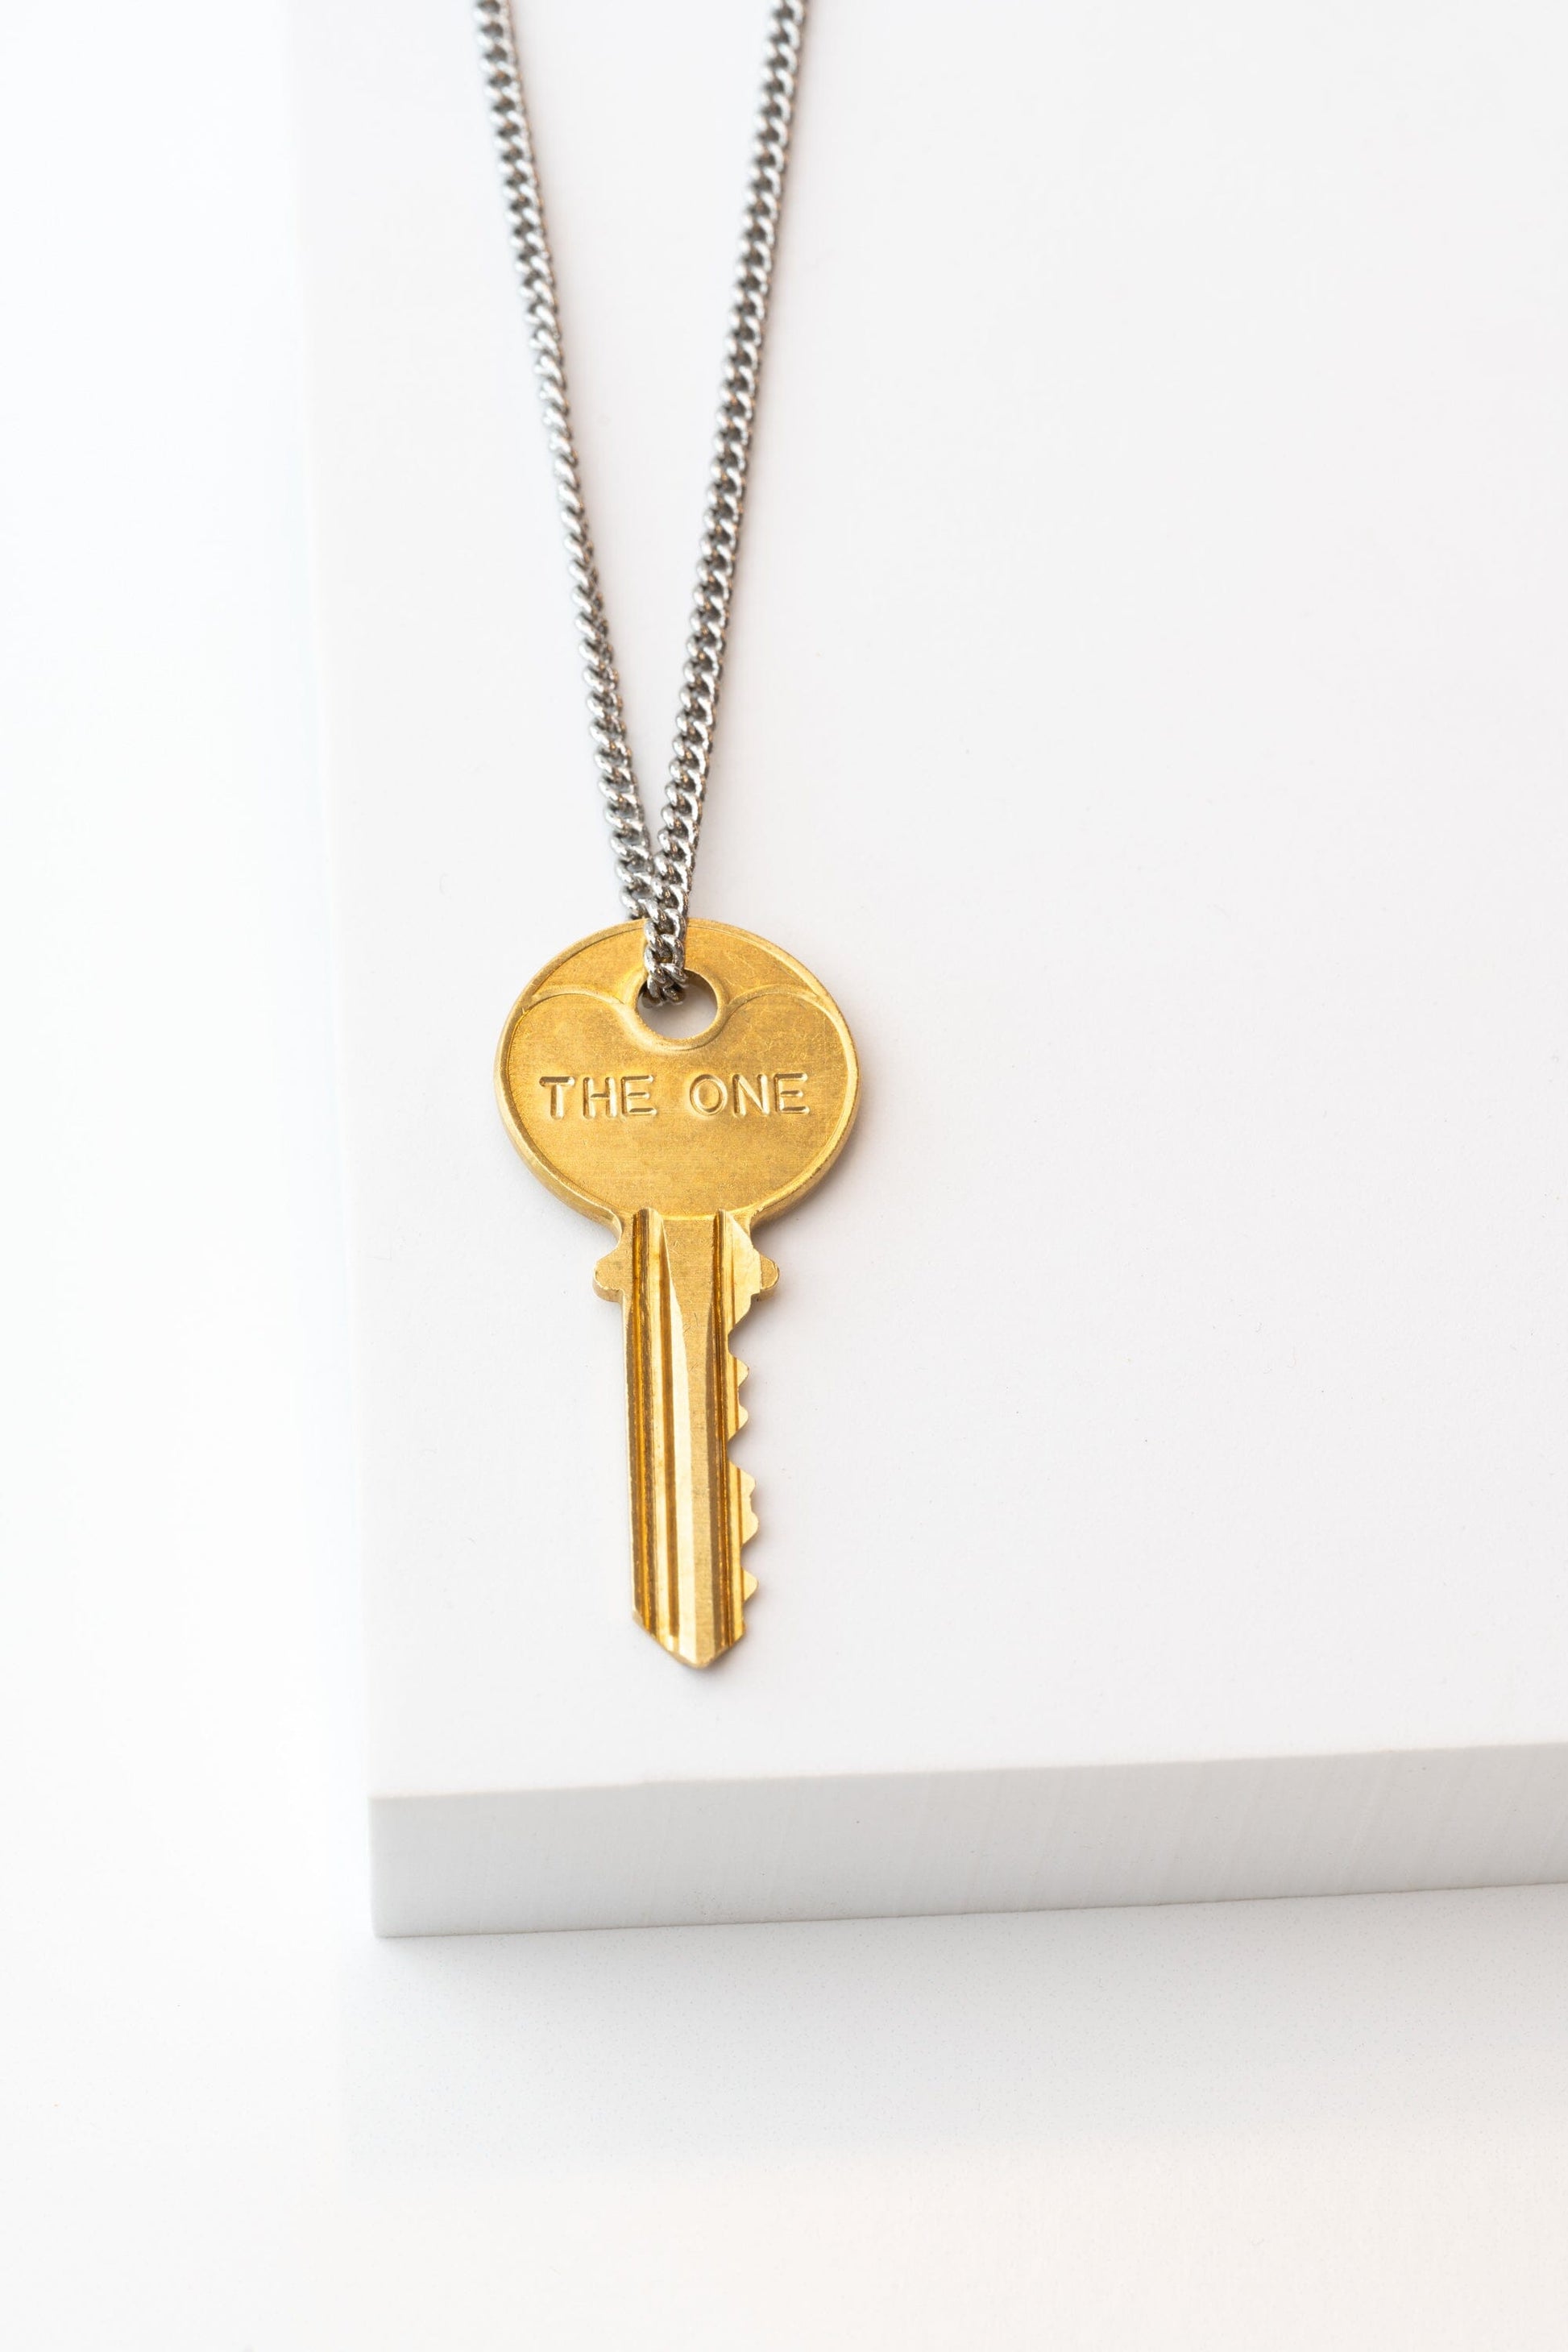 THE ONE Classic Key Necklace Necklaces The Giving Keys Silver 